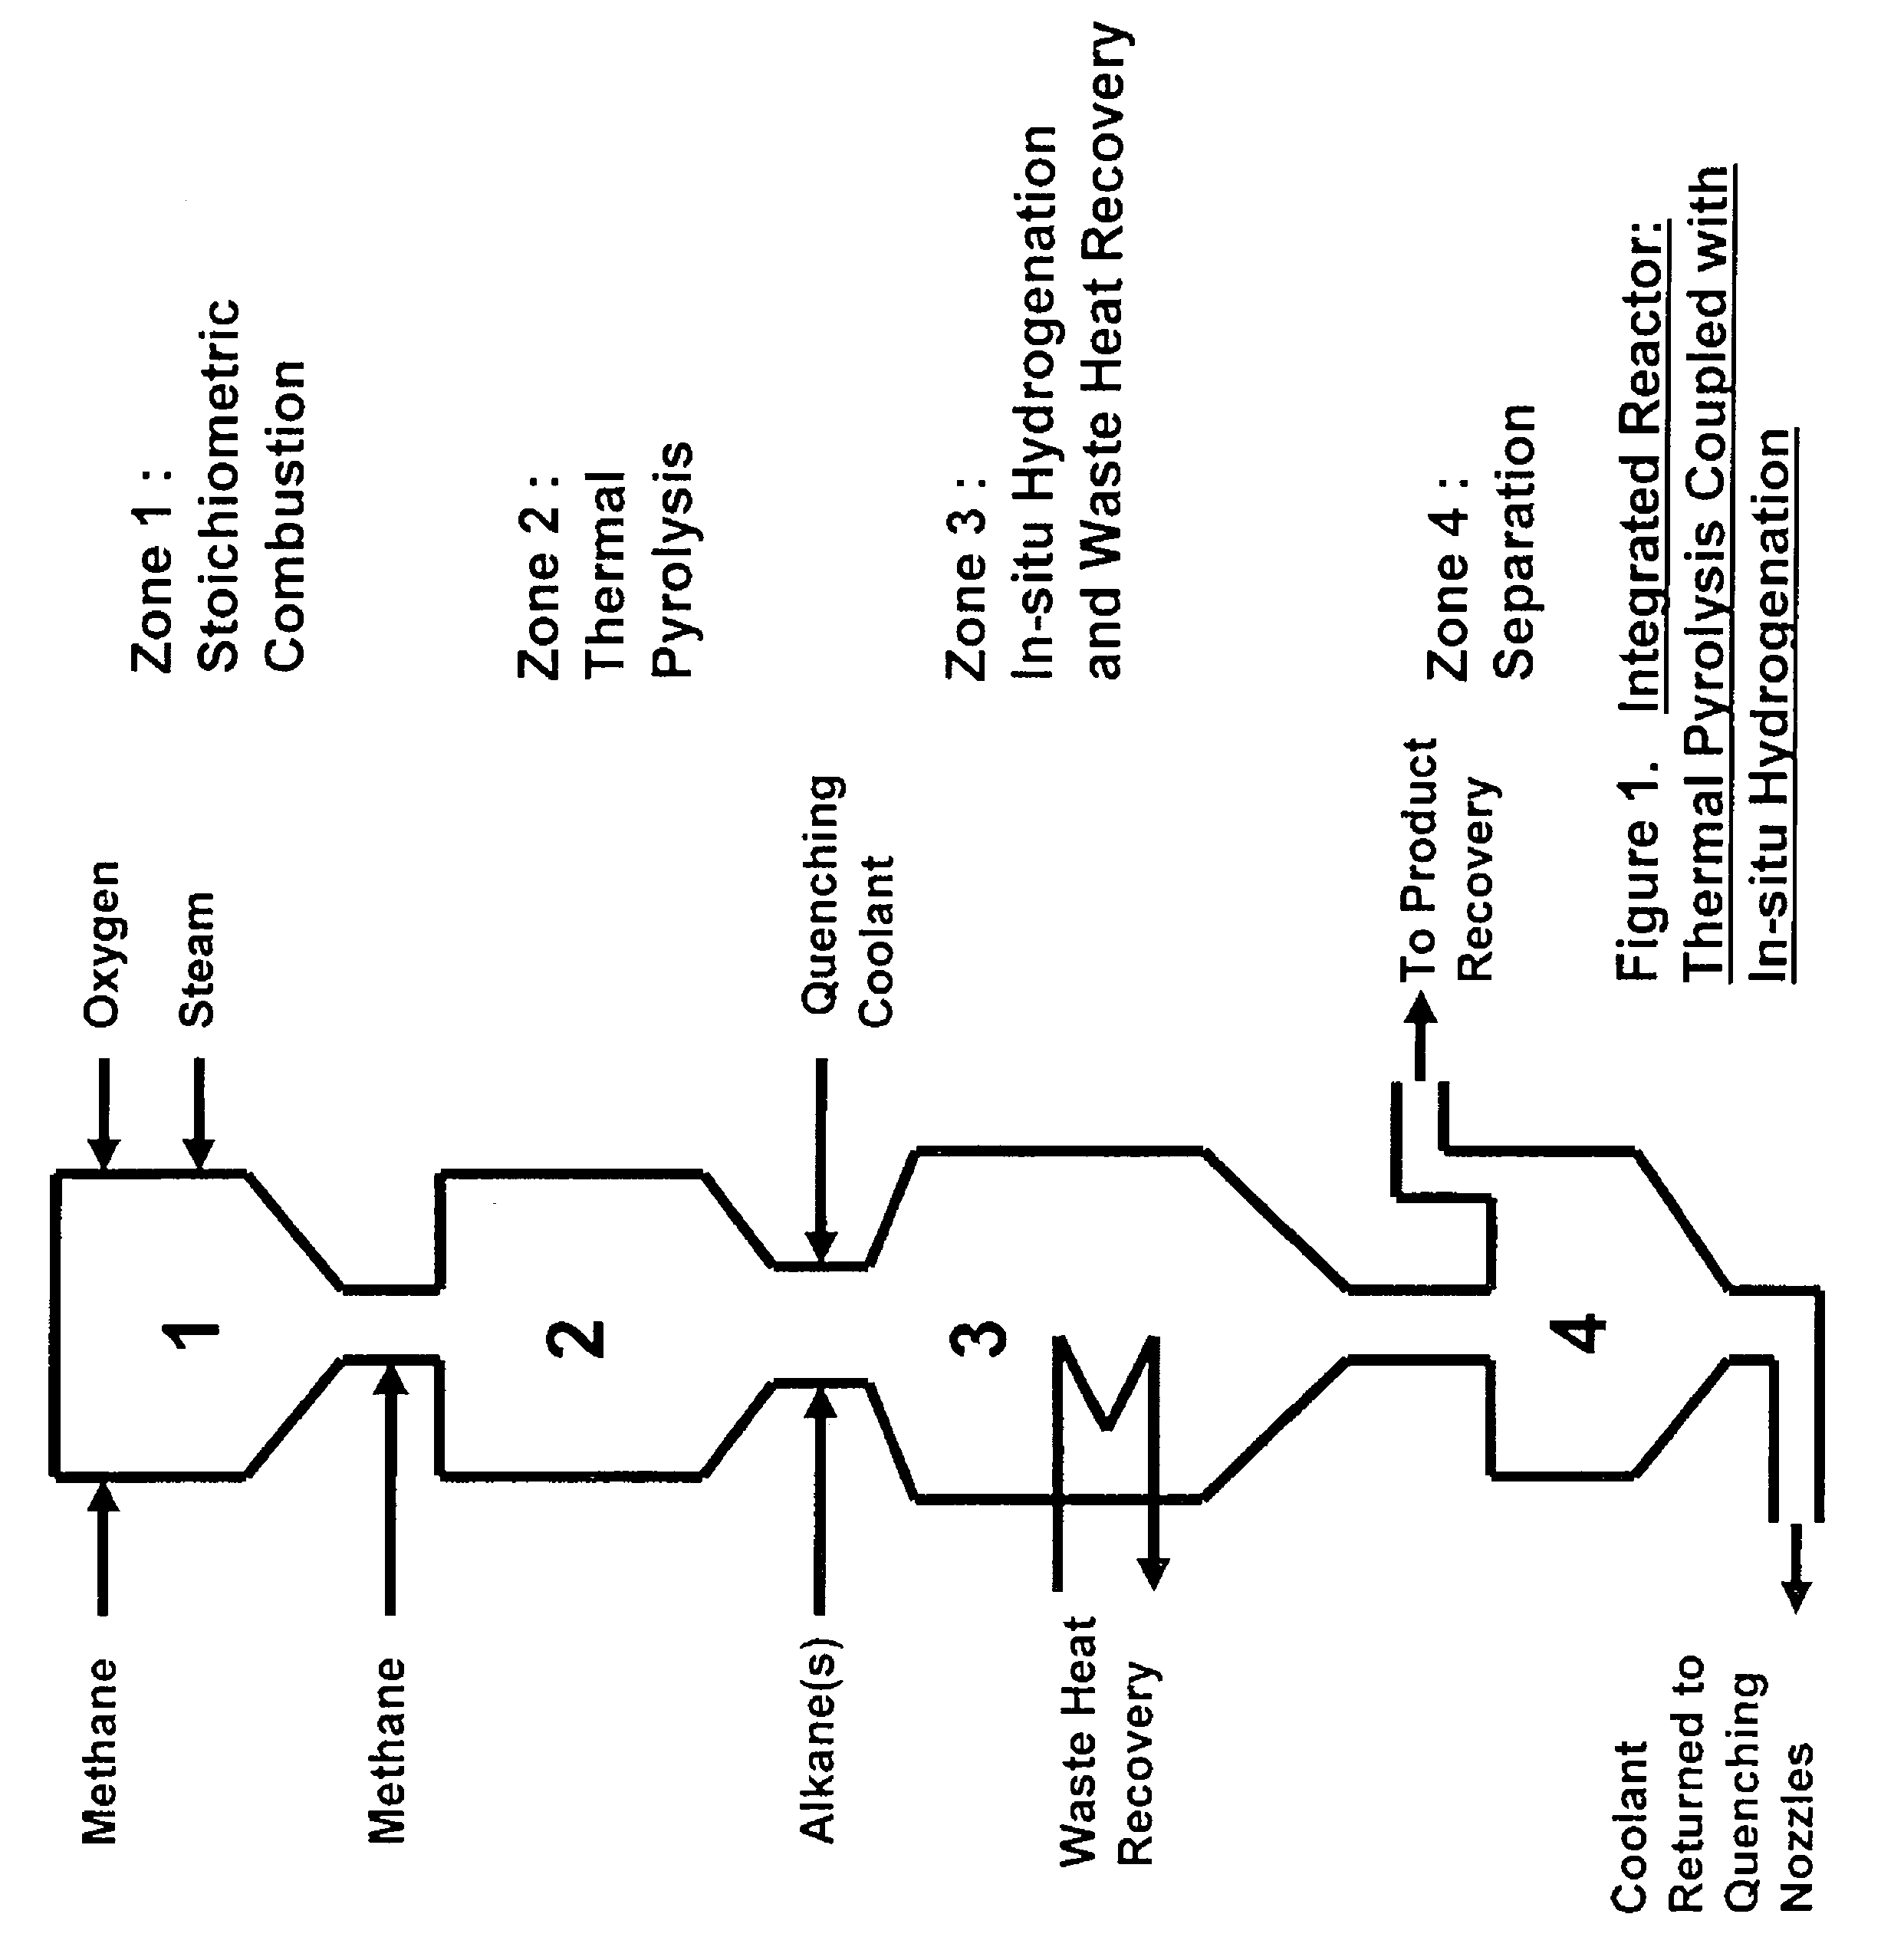 Process for the production of ethylene from natural gas with heat integration